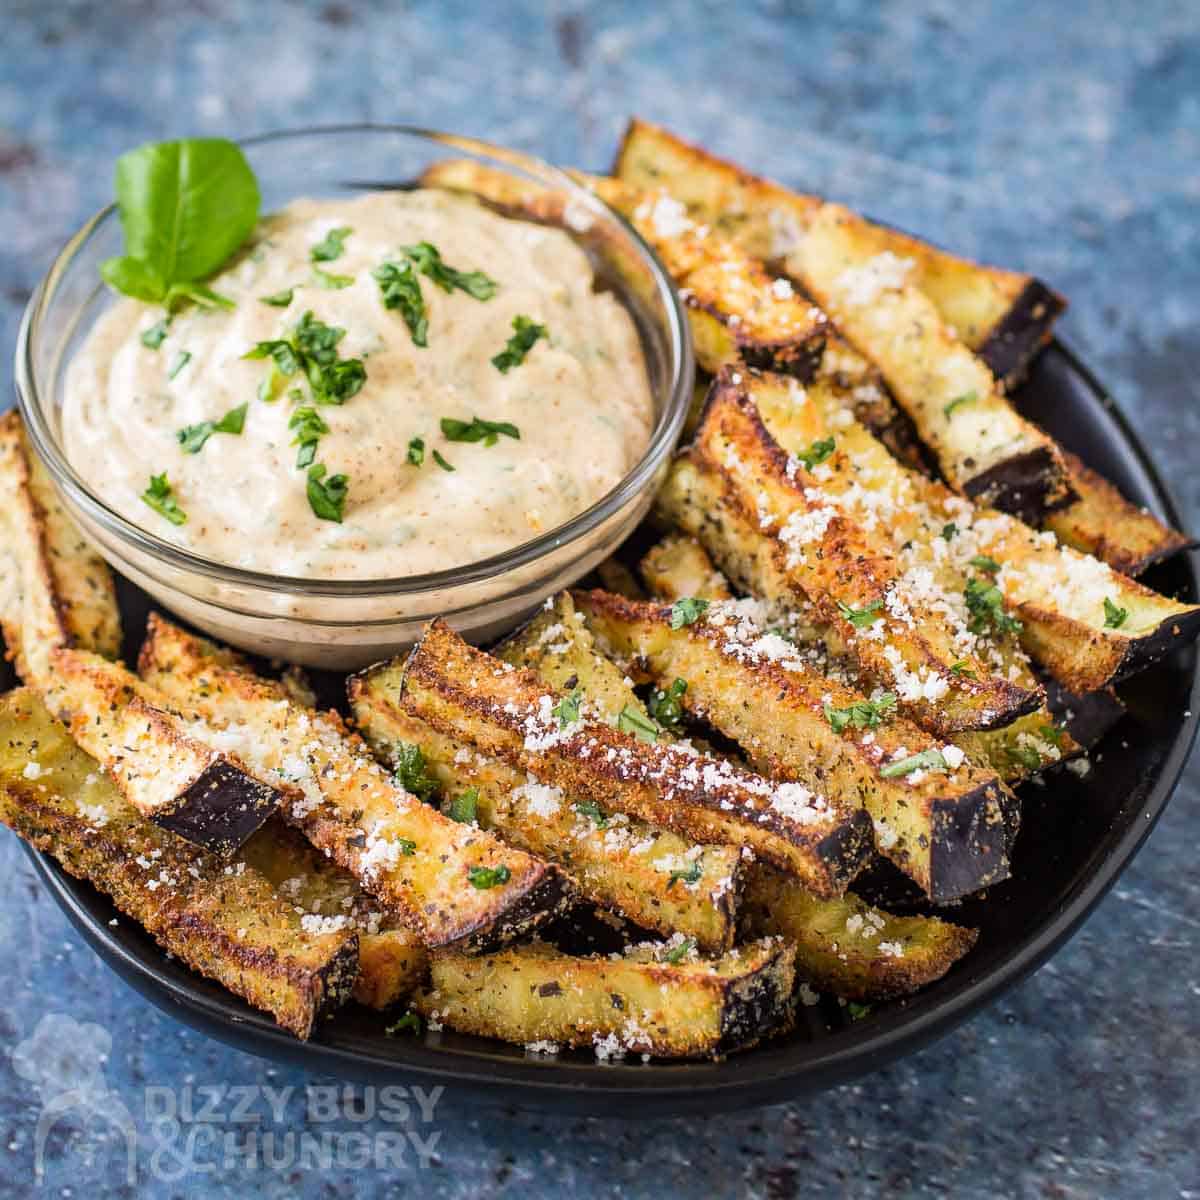 Baked Eggplant Fries with Basil Dipping Sauce